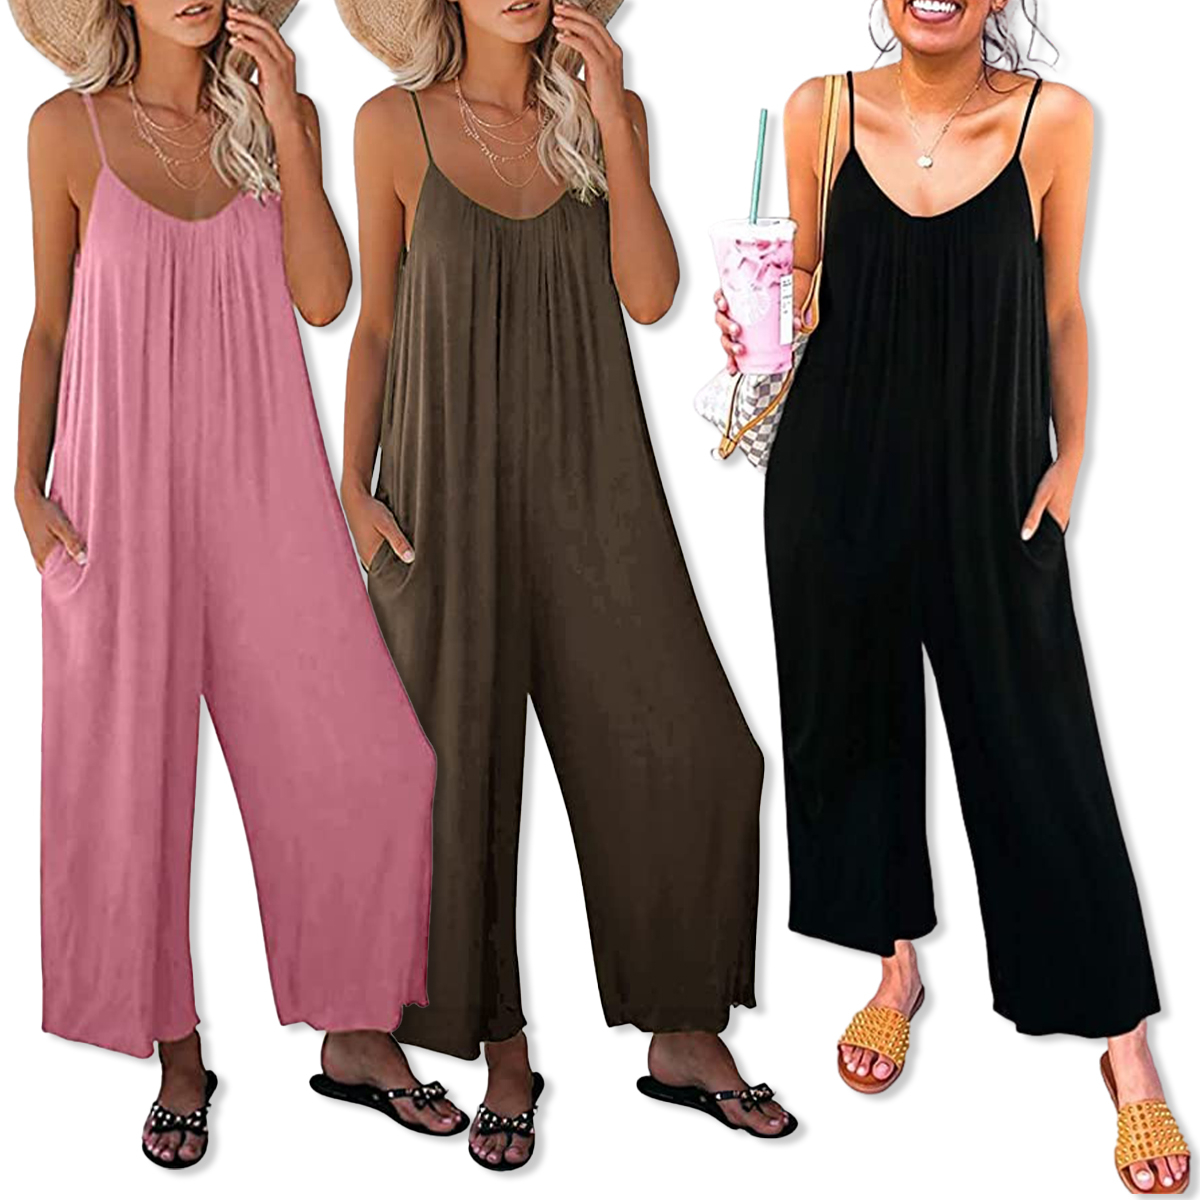 Shoppers Are Summer-Ready Thanks to This $32 Best-Selling Jumpsuit